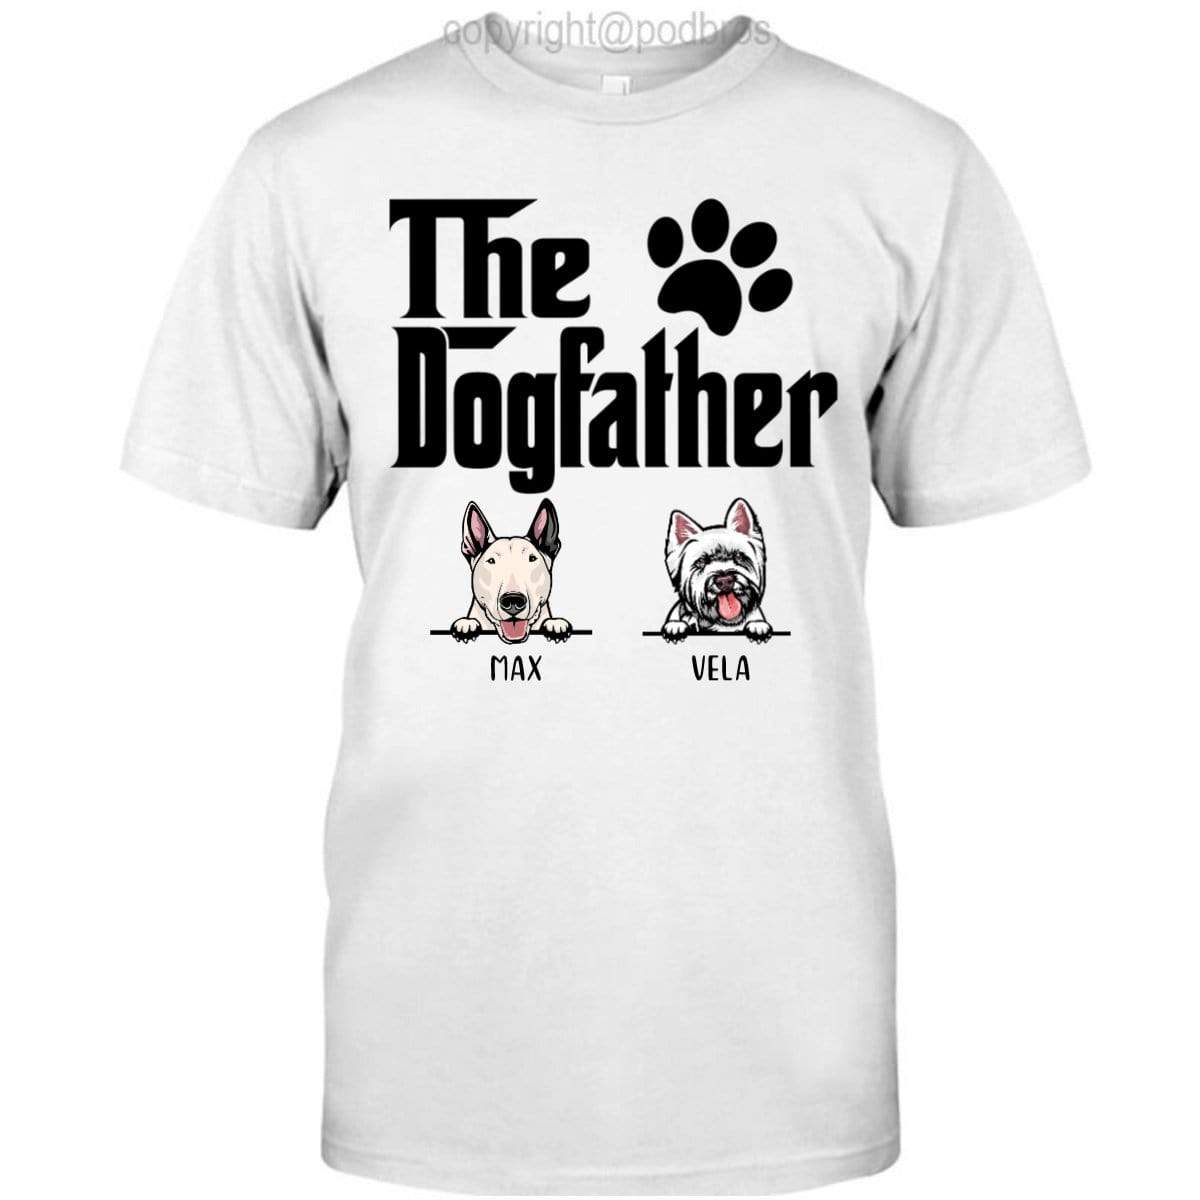 GeckoCustom Personalized Custom T Shirt, Dog Lover Gift, Fathers Day Gift, The Dog Father